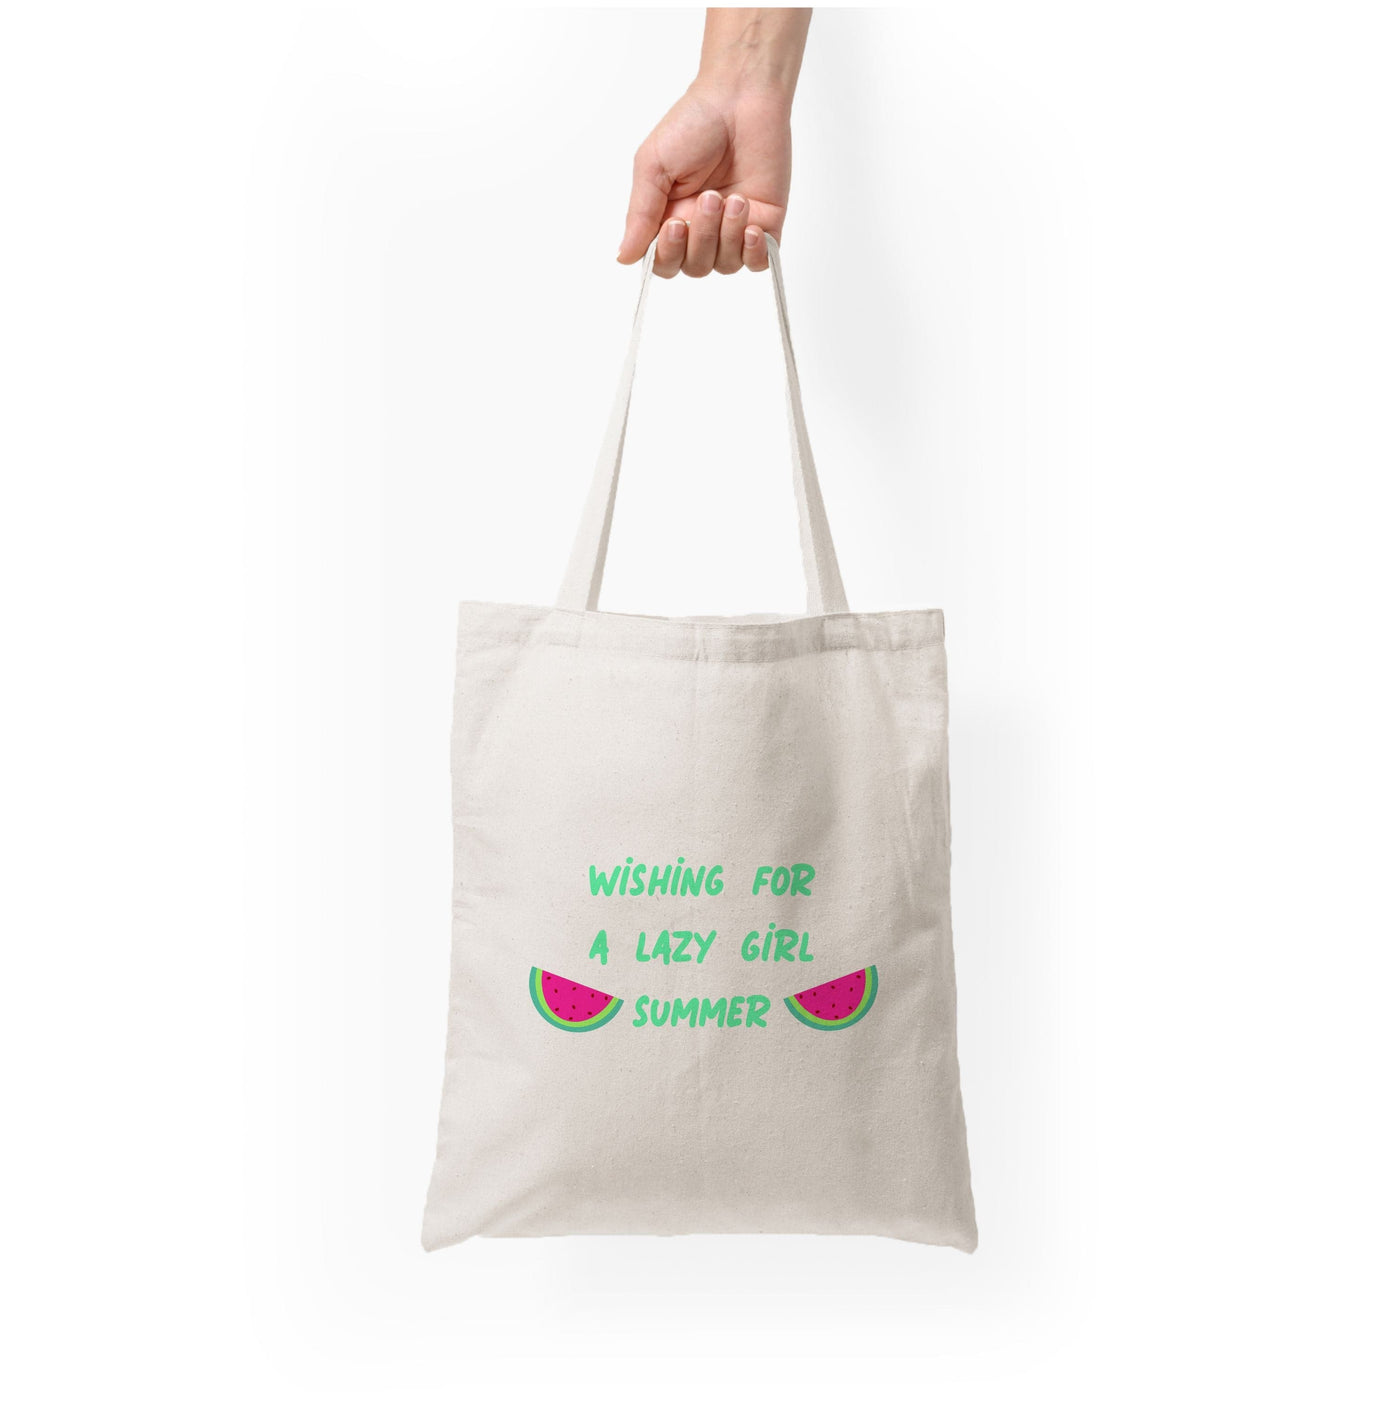 Wishing For A Lazy Girl Summer - Summer Tote Bag